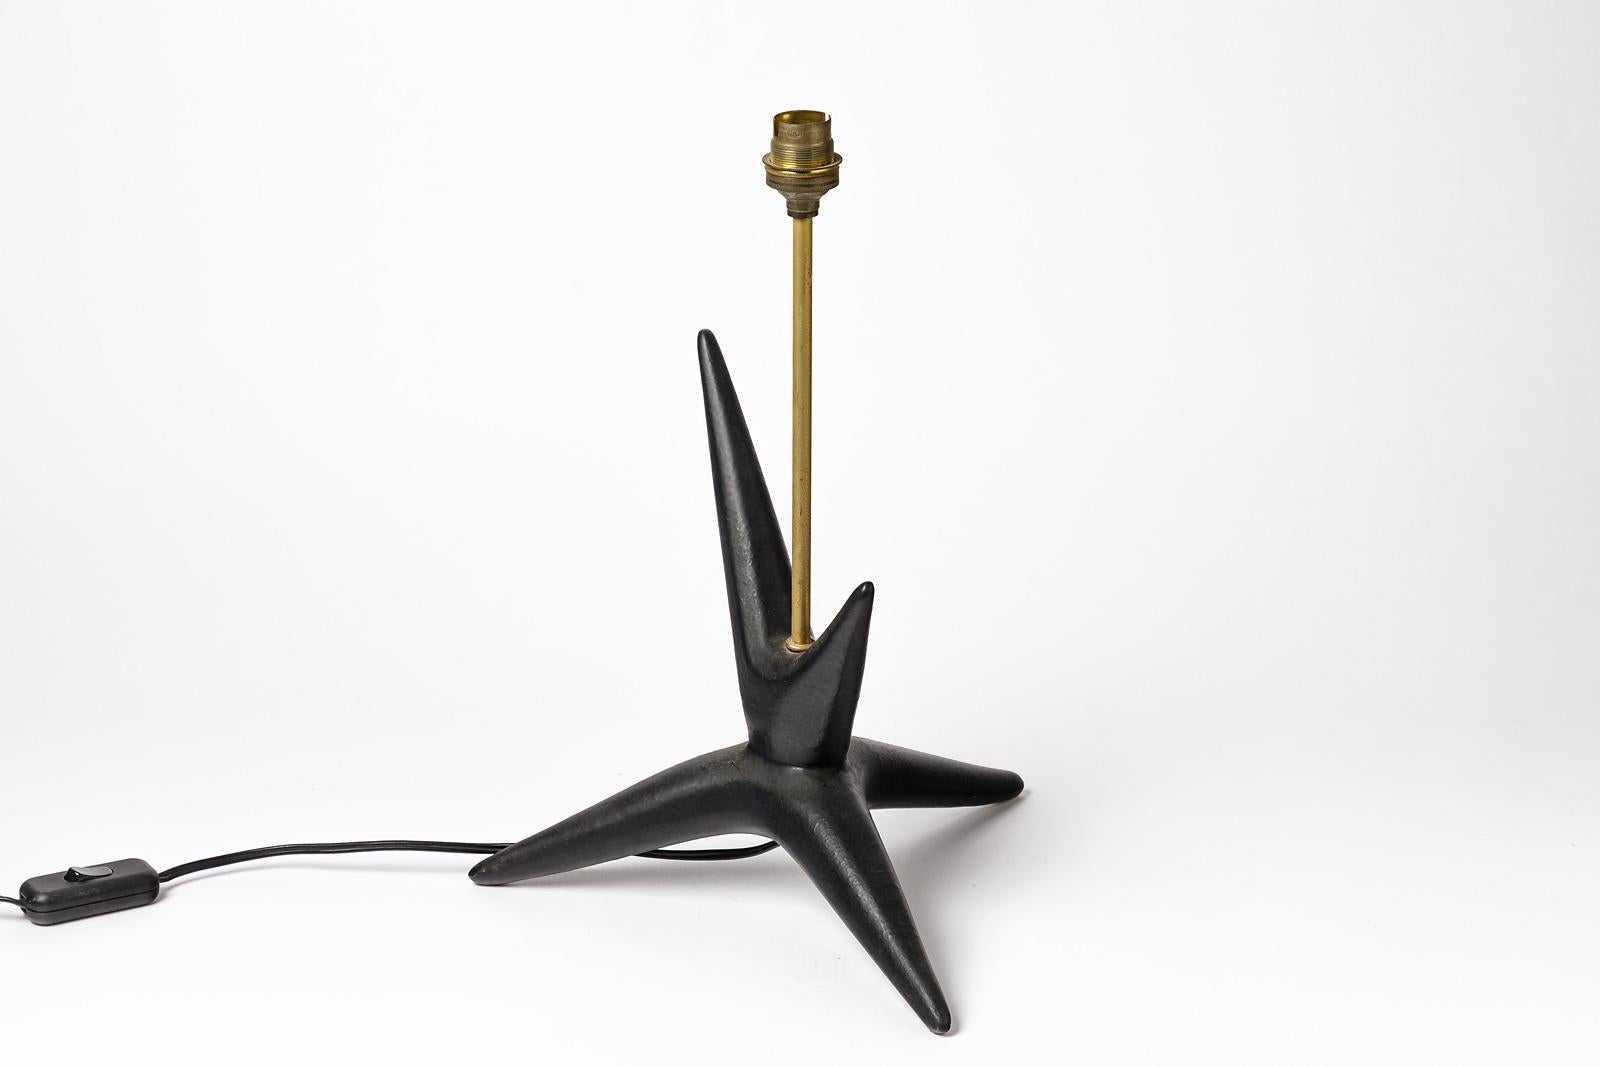 Mid-Century Modern Black Abstract Ceramic Sculpture Table Lamp circa 1950 French Design